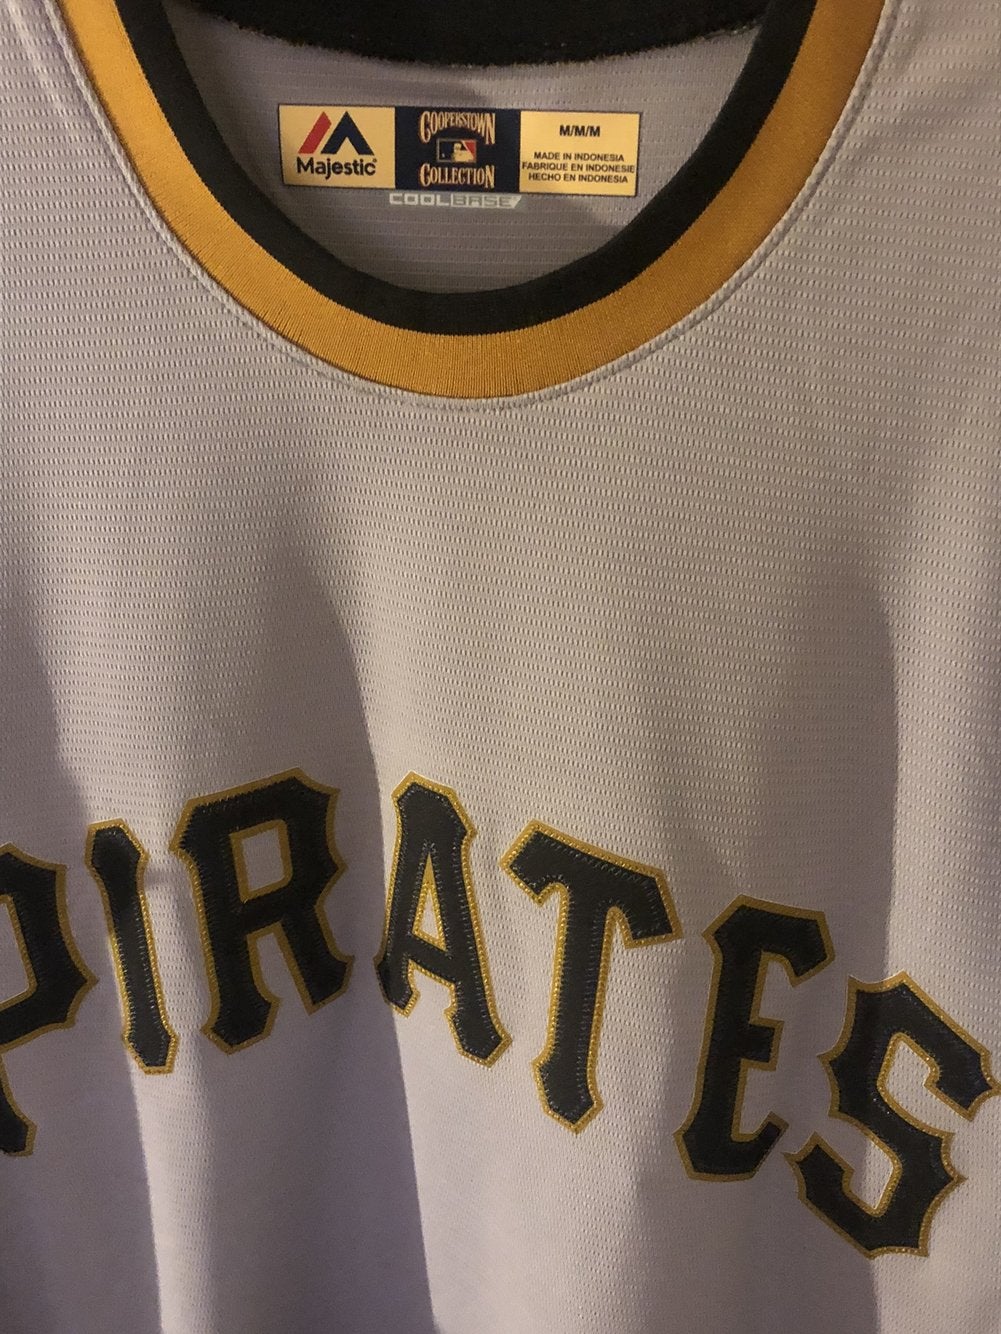 Pittsburgh Pirates majestic men's MLB Cooperstown jersey M